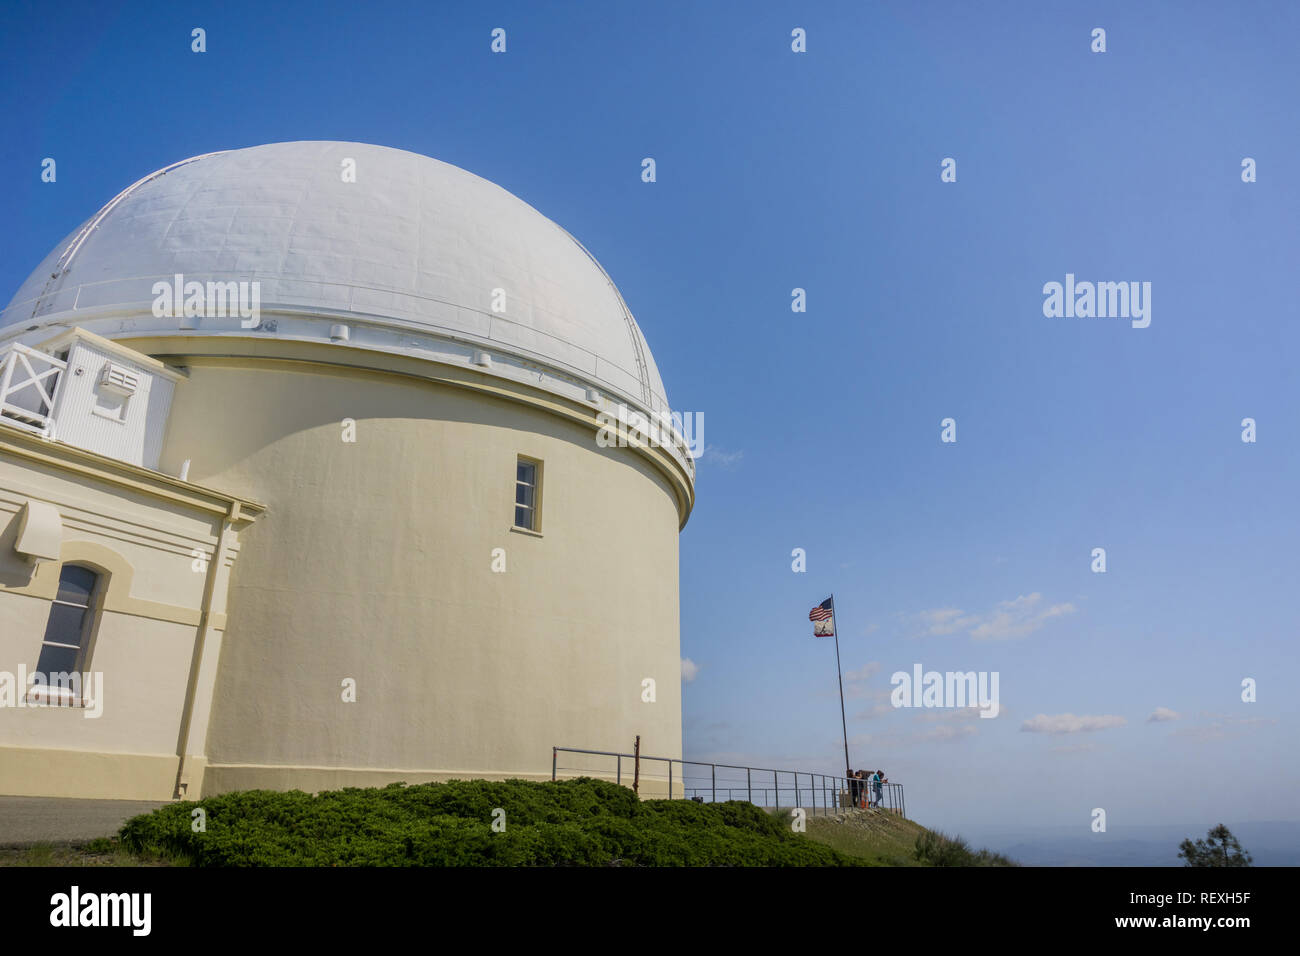 May 7, 2017 San Jose/CA/USA - Dome of the historical building of Lick Observatory - Mount Hamilton, south San Francisco bay Stock Photo